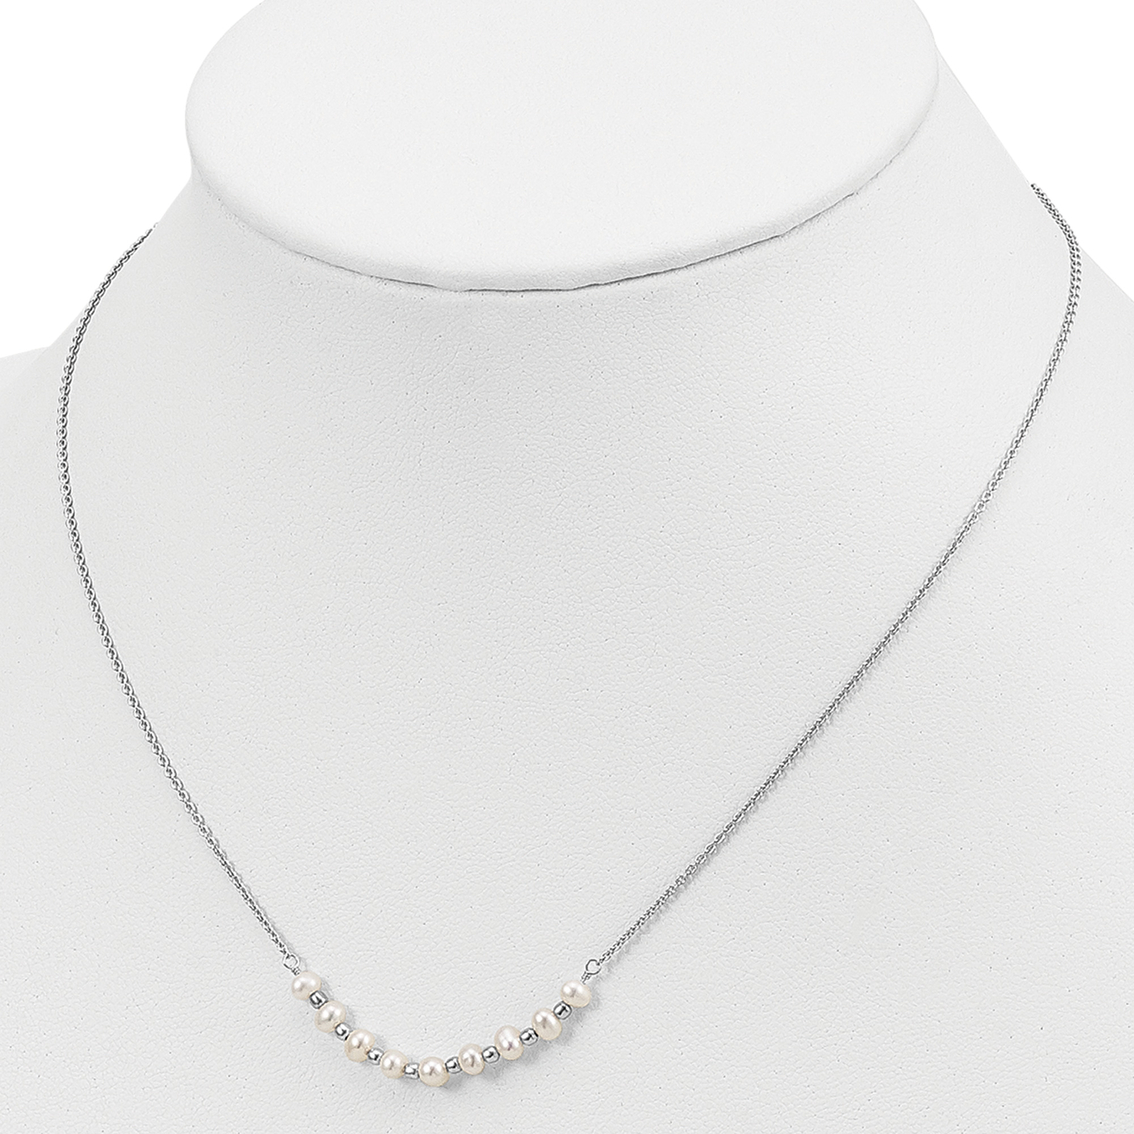 Sterling Silver Freshwater Cultured Pearl Necklace - Image 3 of 3